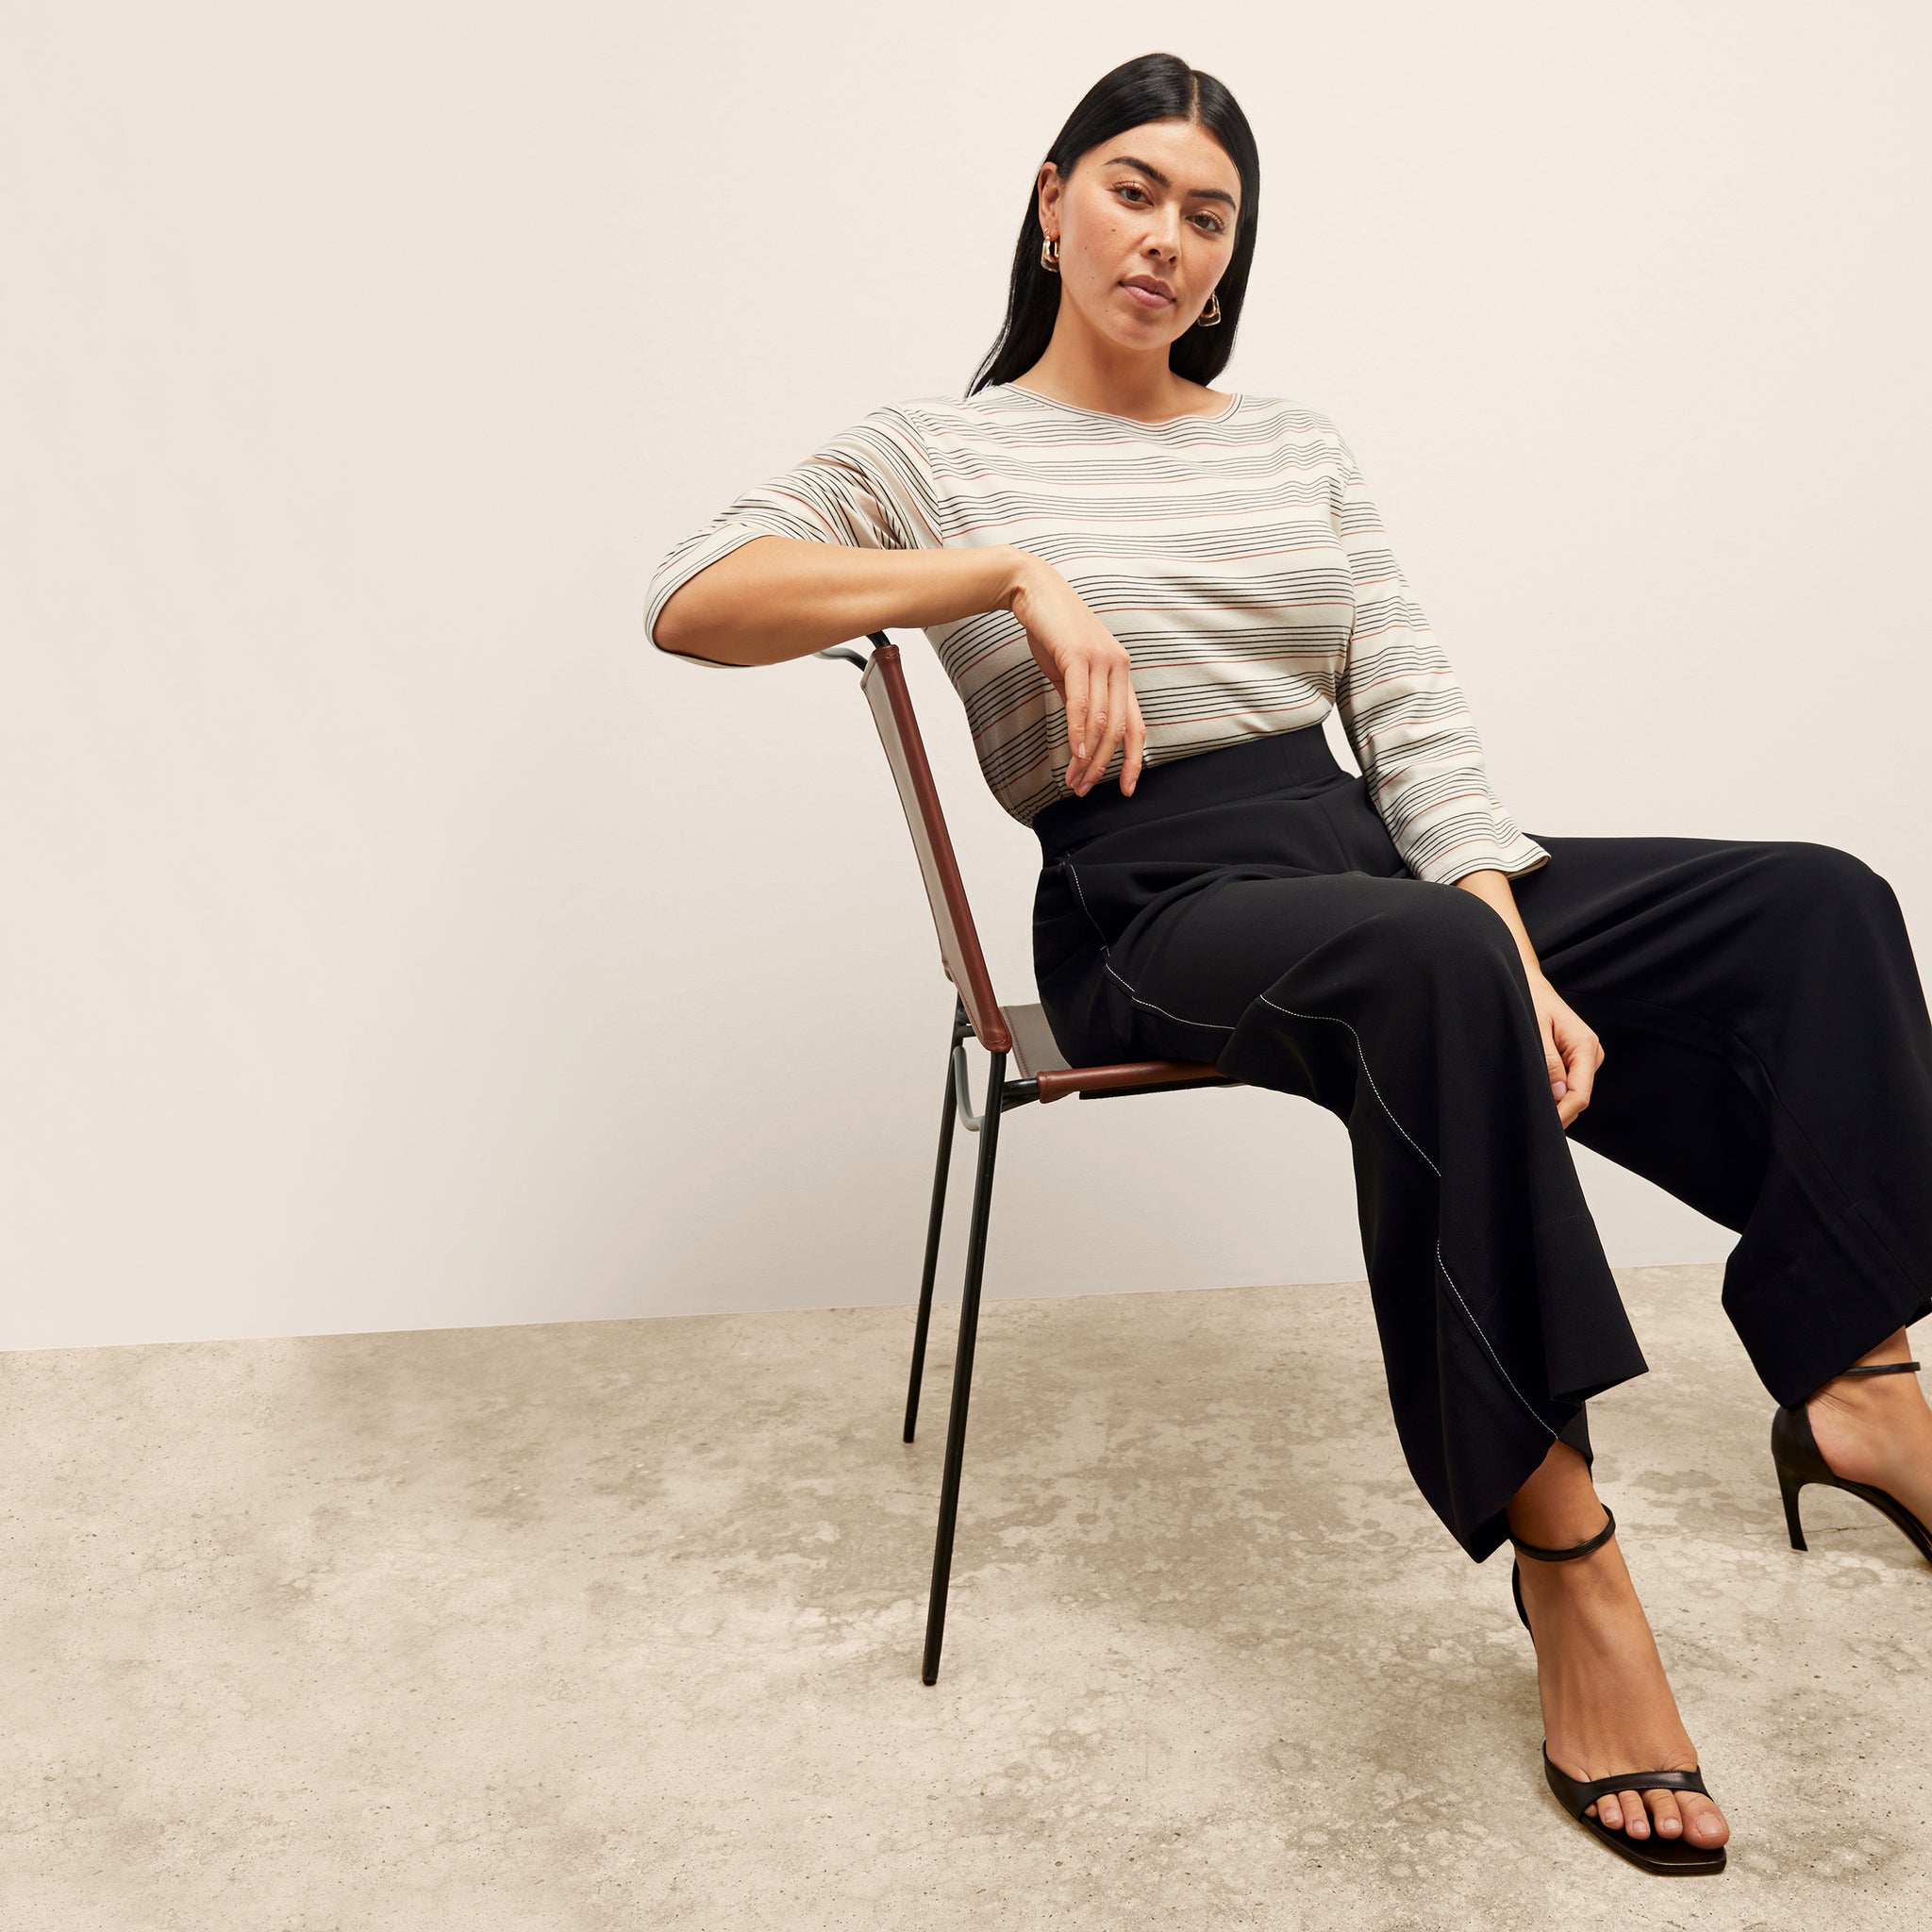 front image of a woman wearing the elena pant in black